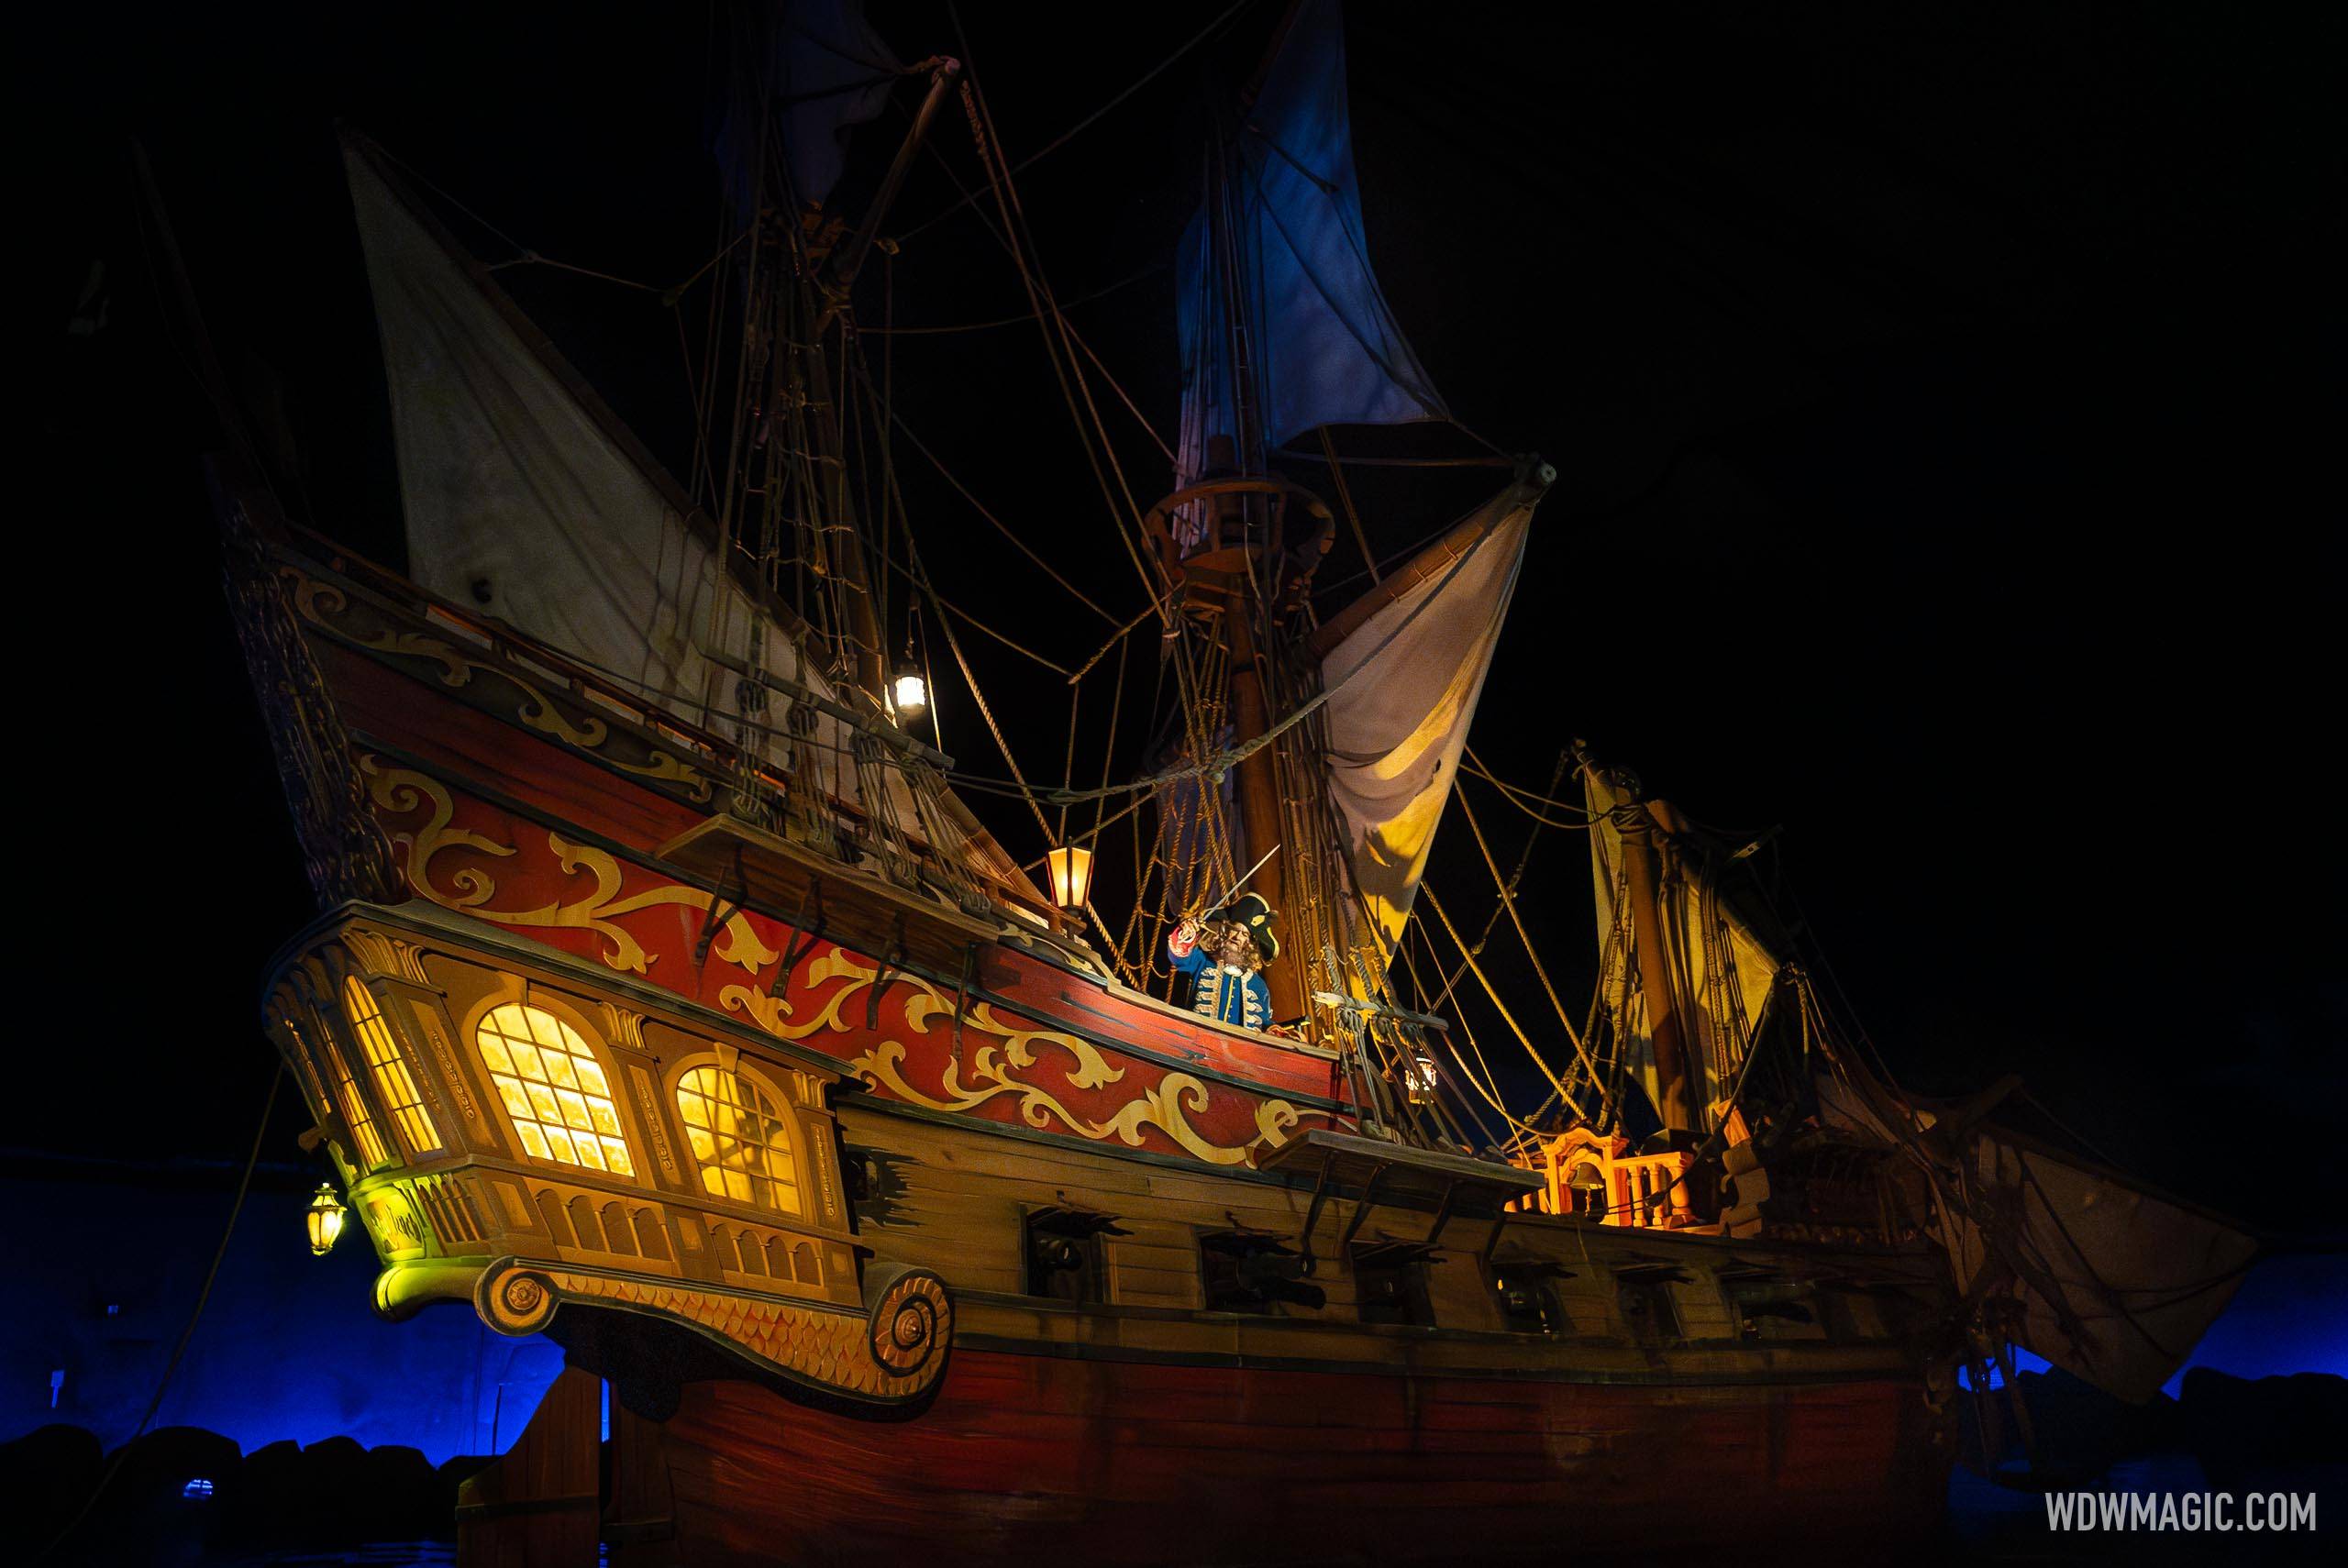 Storyline and more details about the Pirates of the Caribbean enhancements